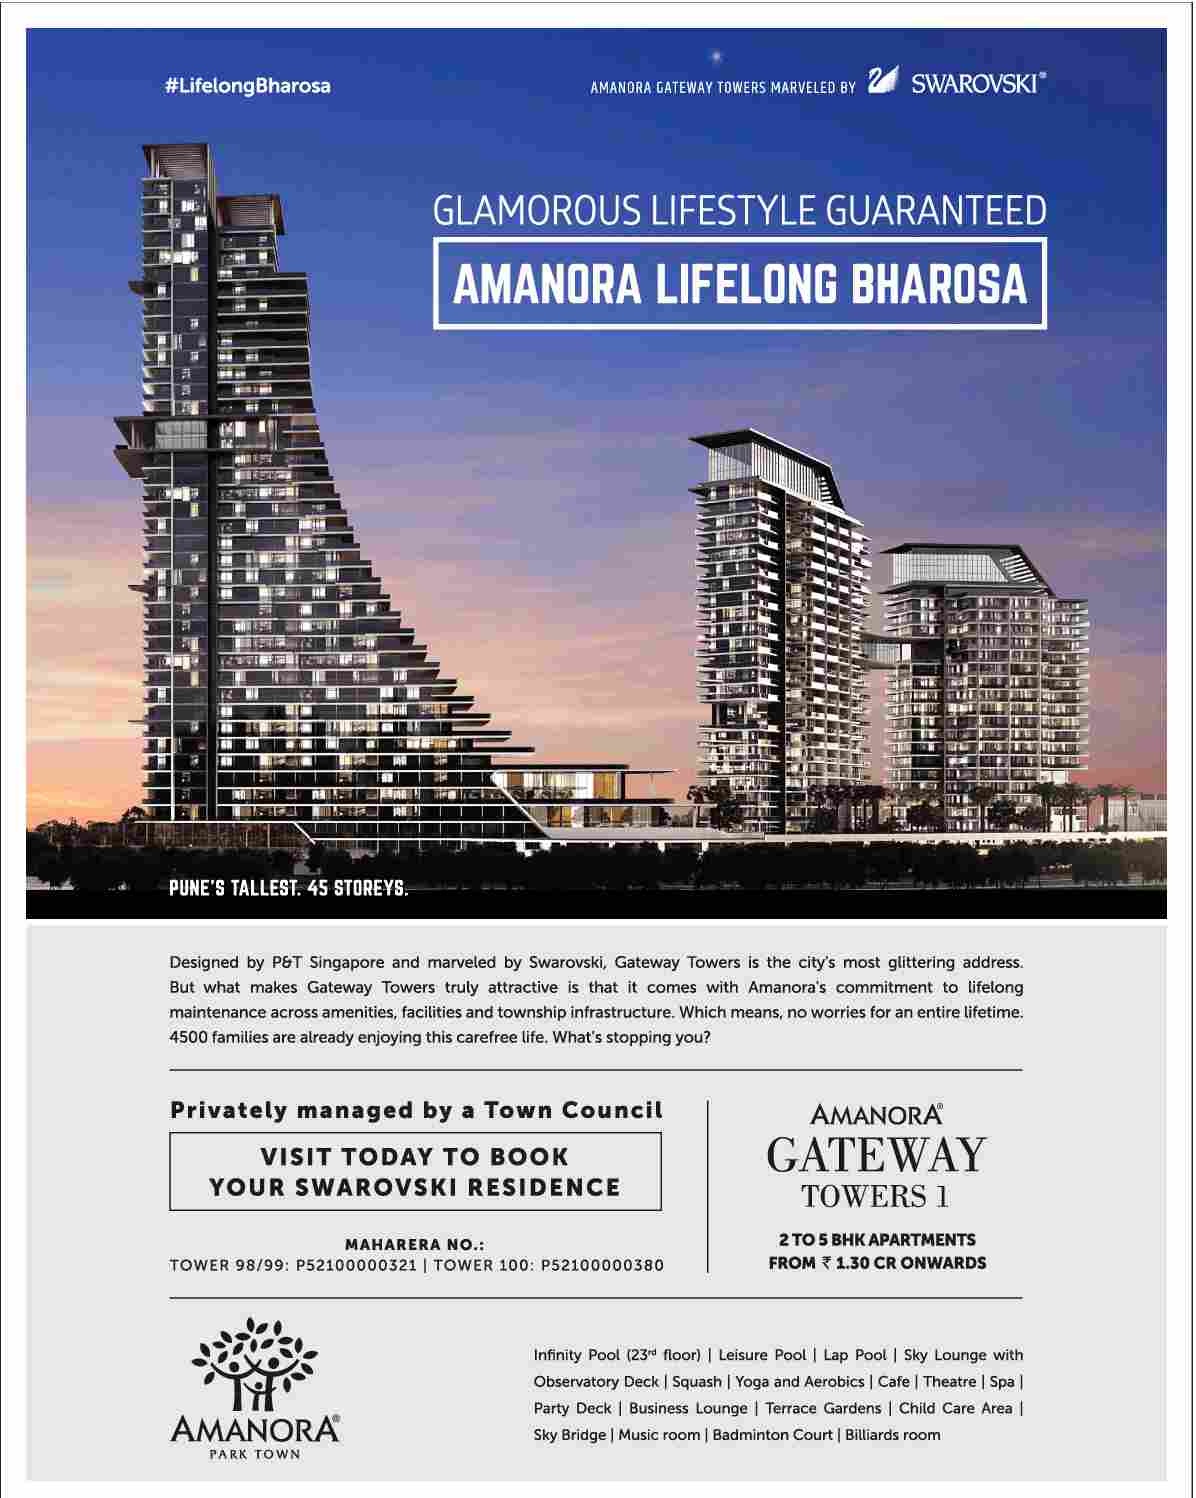 Glamorous lifestyle guaranteed for you at Amanora Gateway Towers in Pune Update